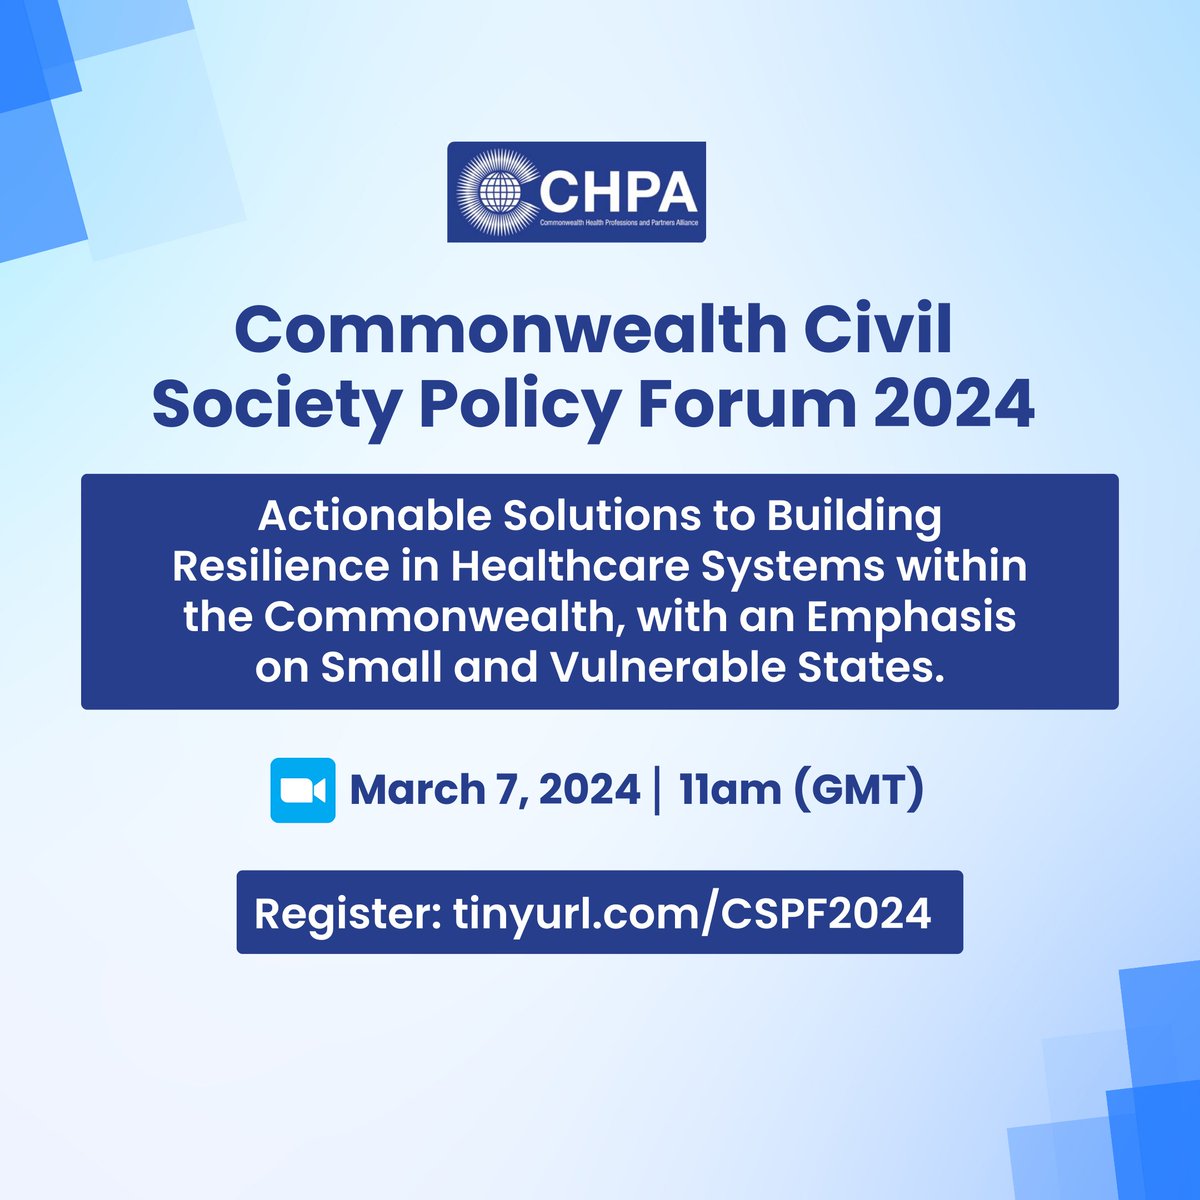 With just less than 48 hours to go until the 2024 Commonwealth Civil Society Policy Forum, we're gearing up for an insightful day of dialogue and collaboration. Join us to contribute to actionable solutions for healthcare resilience. Register now - tinyurl.com/CSPF2024